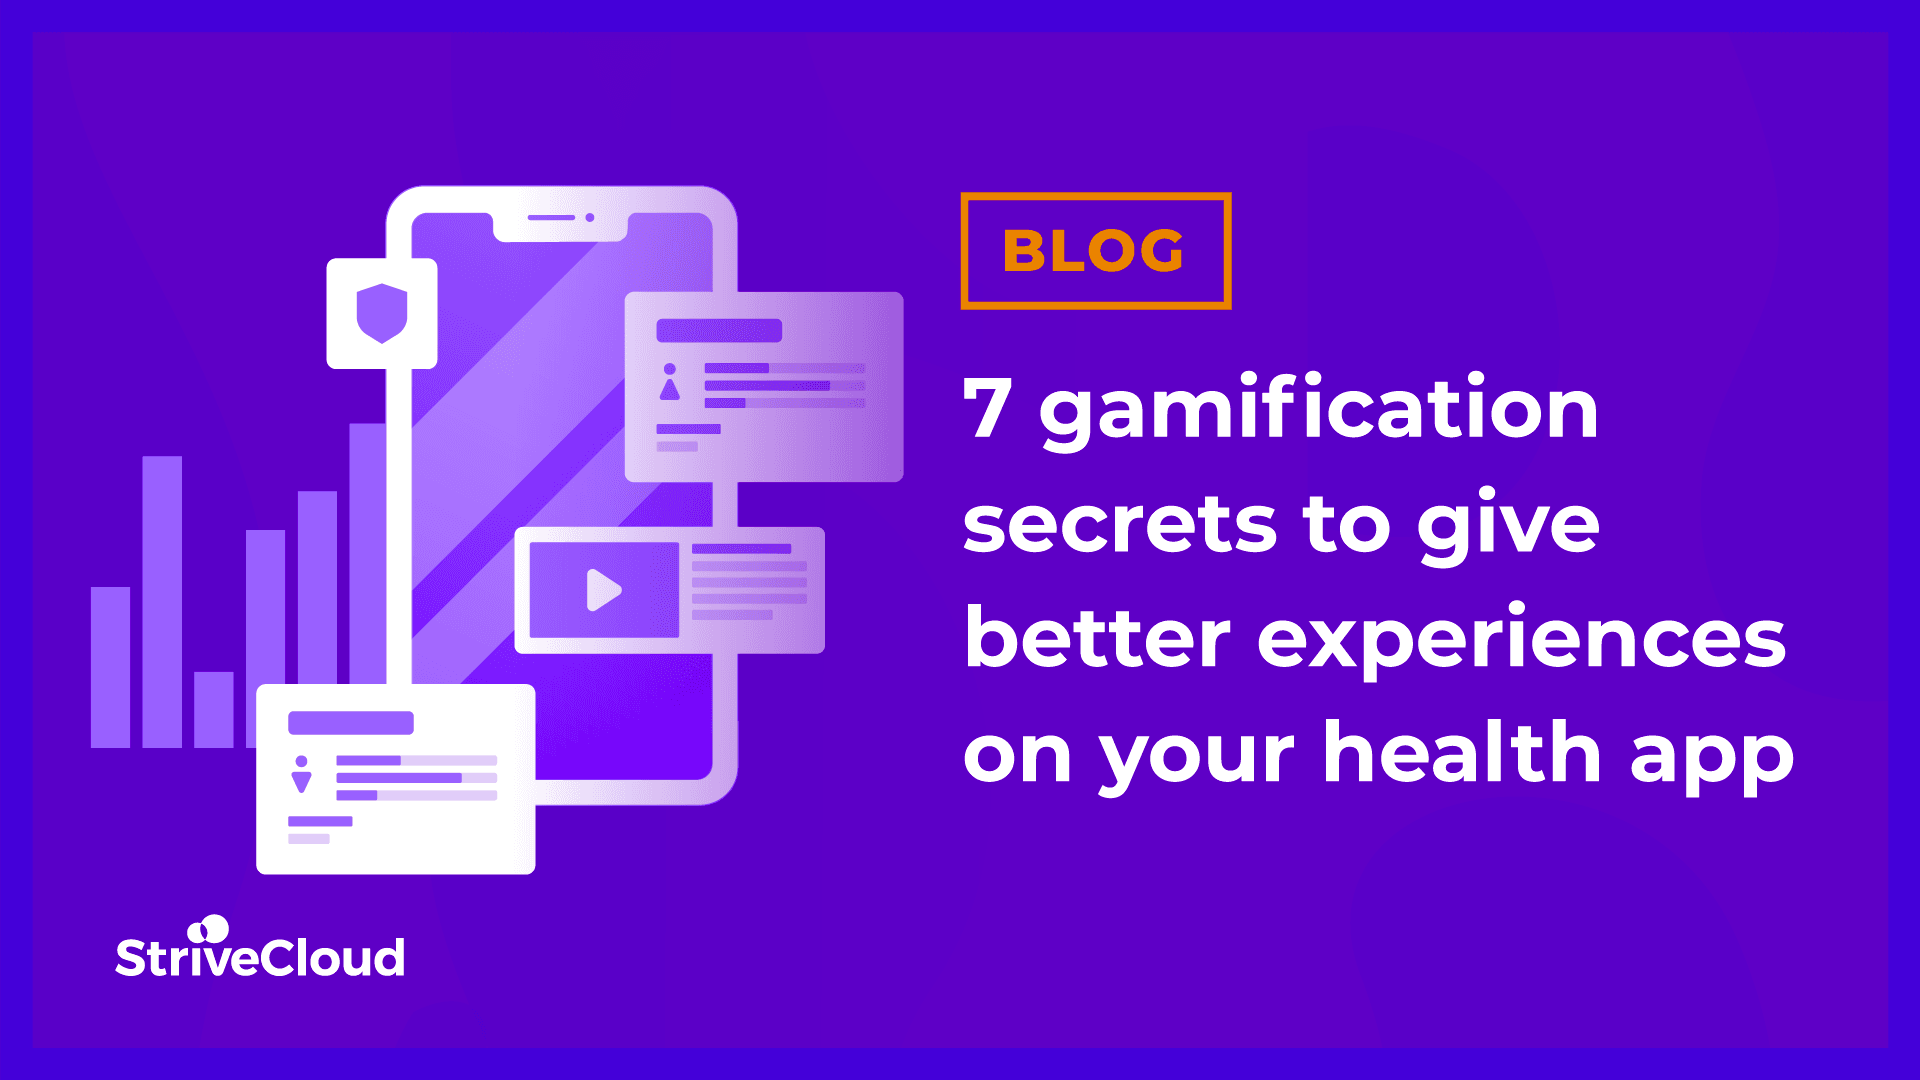 7 gamification secrets to give better experiences on your health app